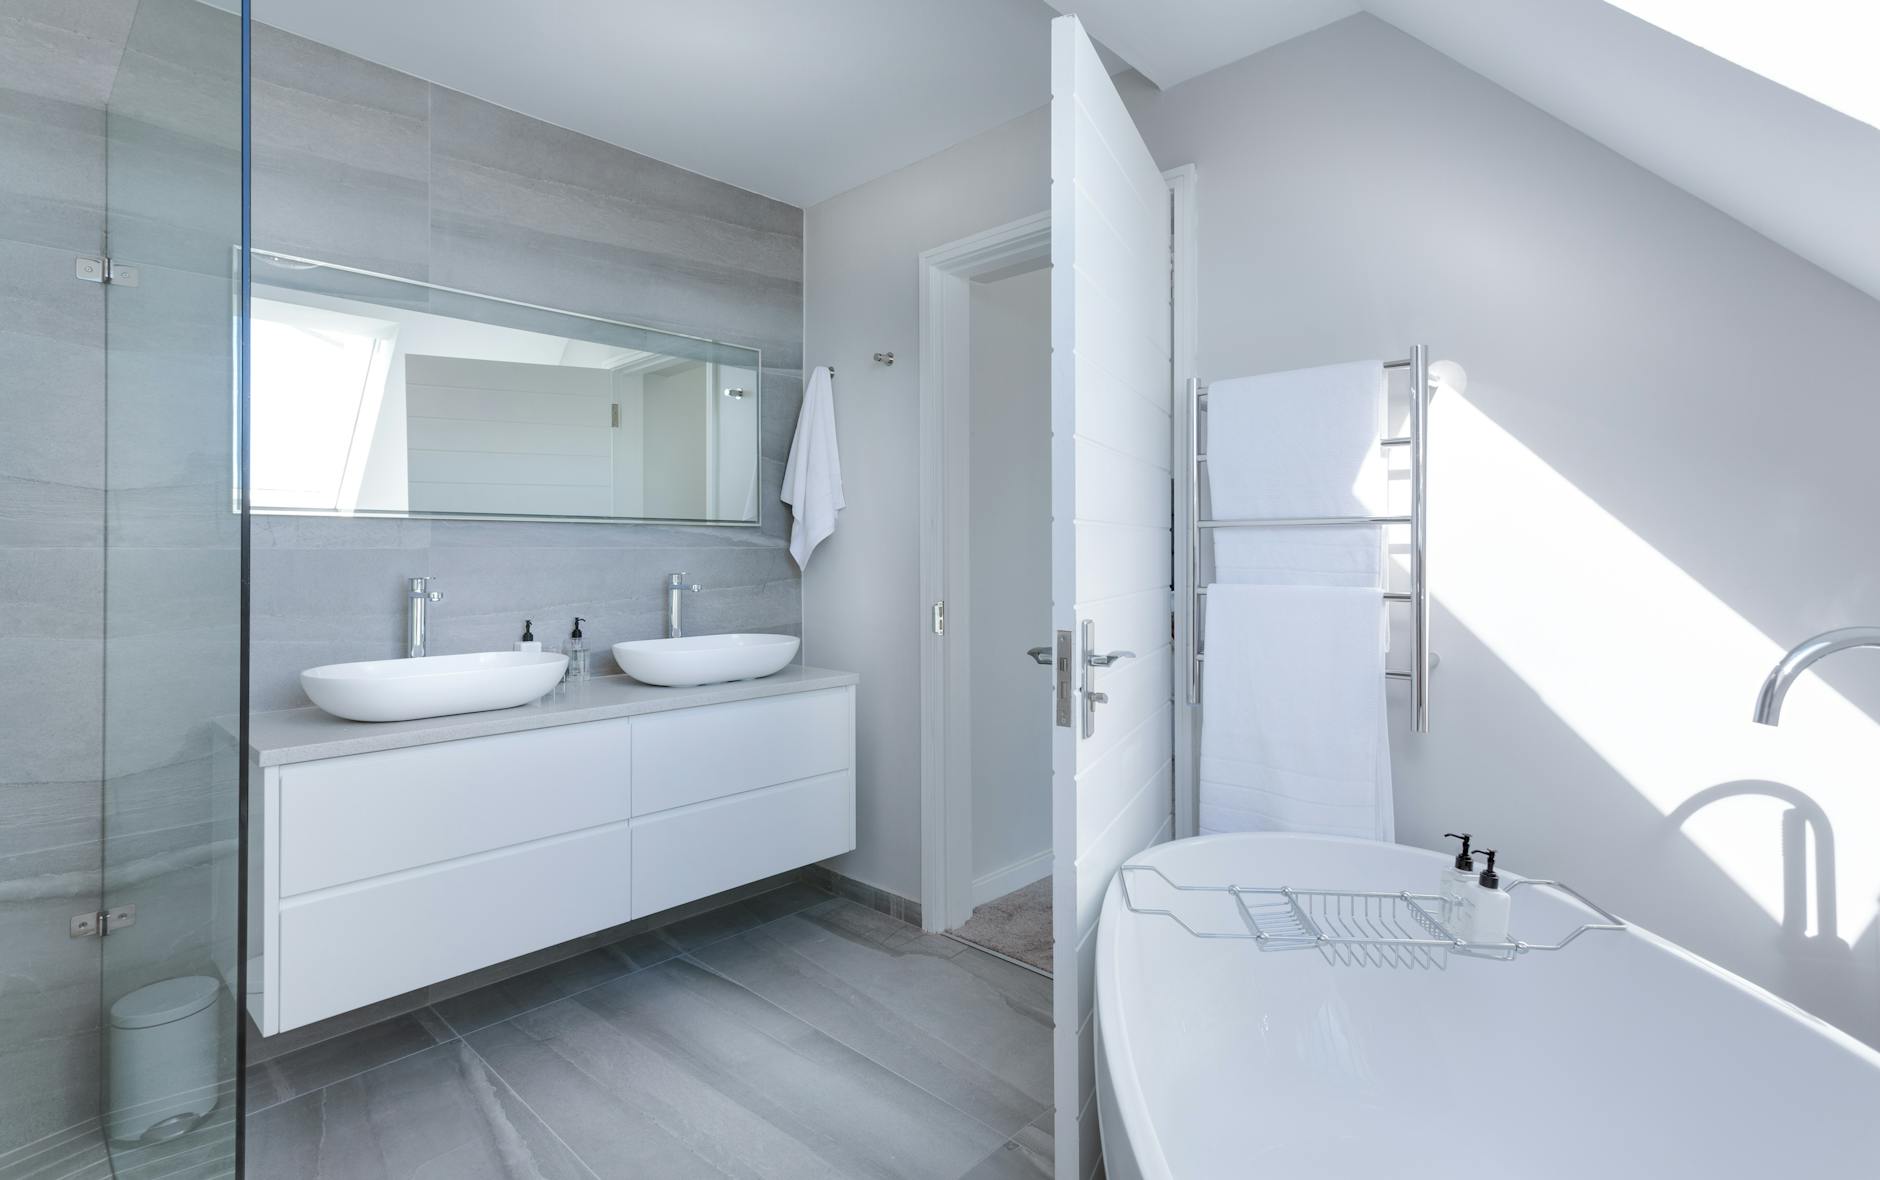 Bathroom after renovation in a modern home